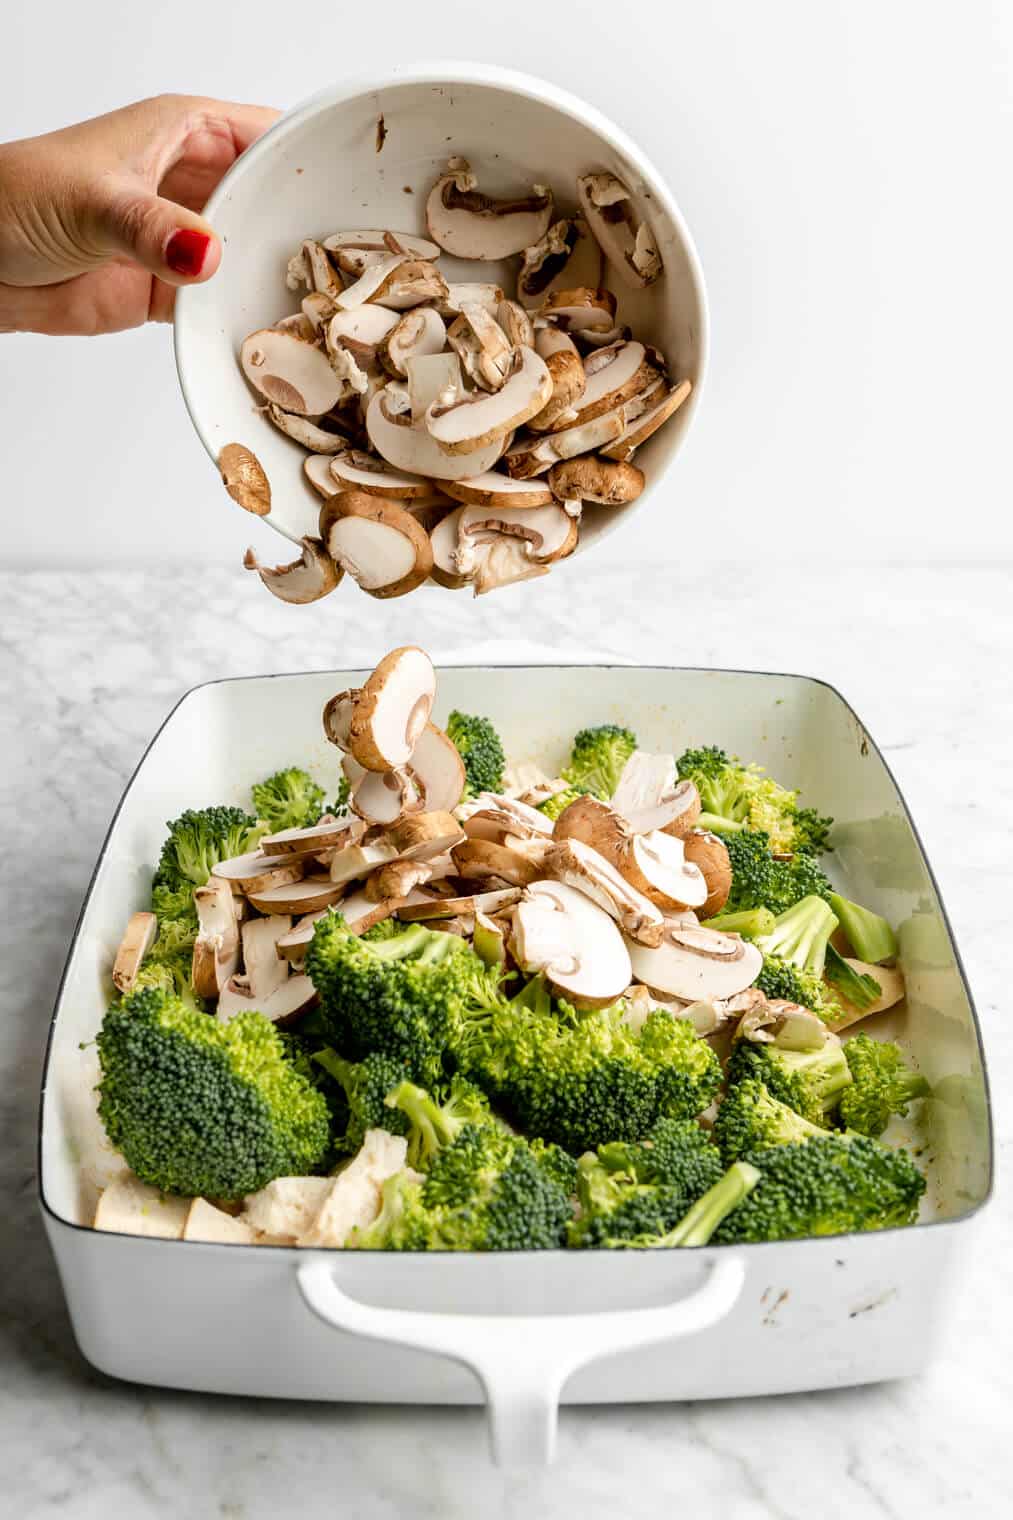 Hand holding a white bowl pouring sliced mushrooms over broccoli and chicken in a casserole dish.